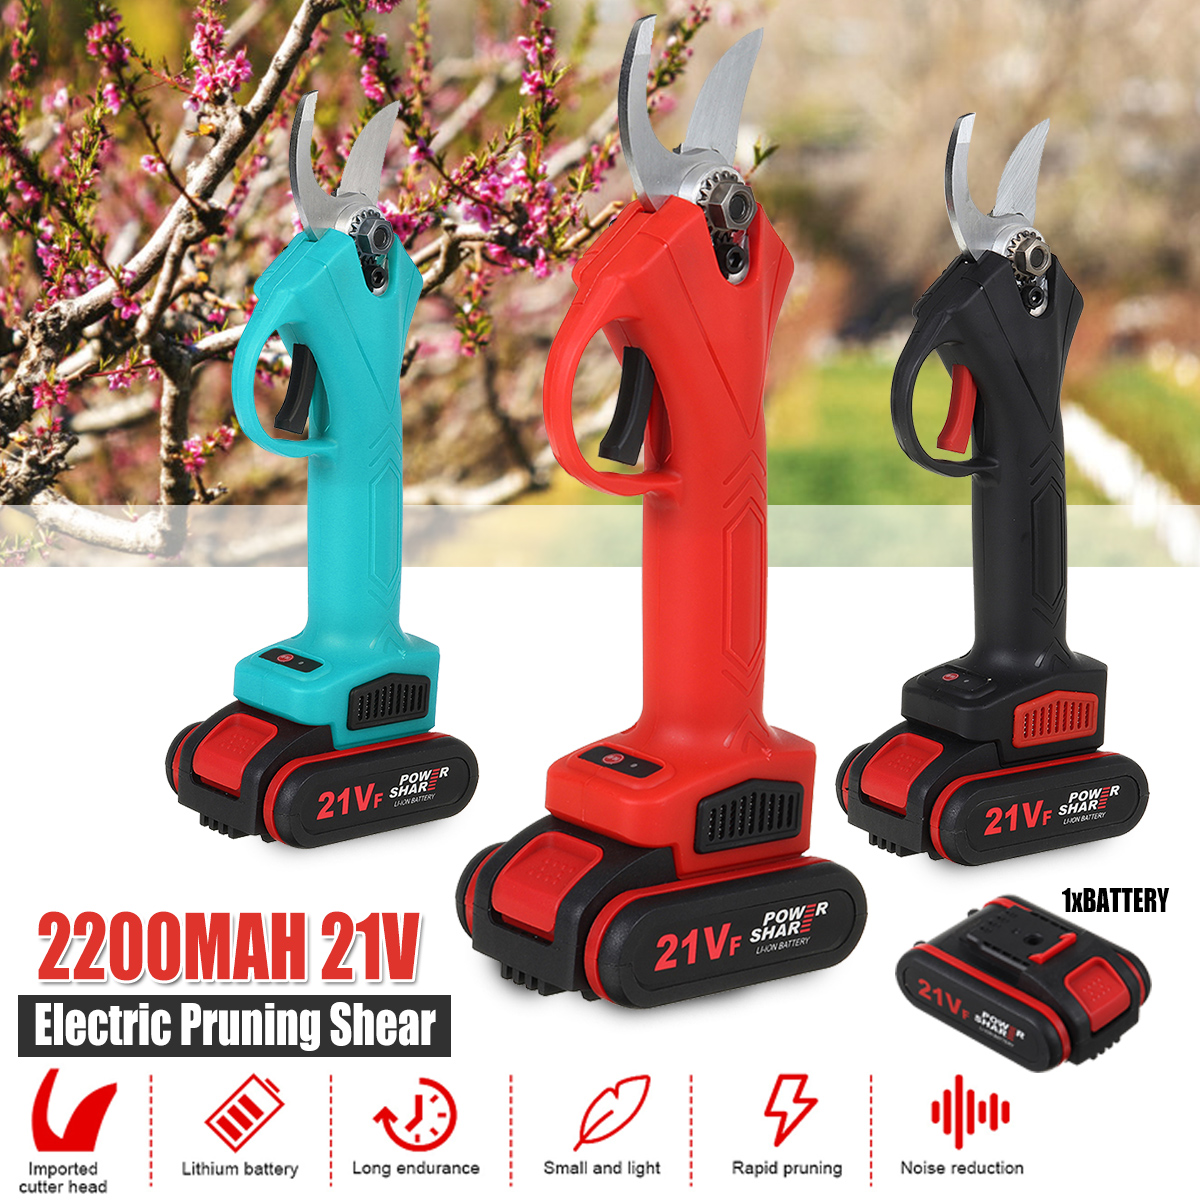 21V-Wireless-25mm-Rechargeable-Electric-Scissors-Branch-Pruning-Shear-Tree-Cutting-Tools-W-1-Battery-1749245-2